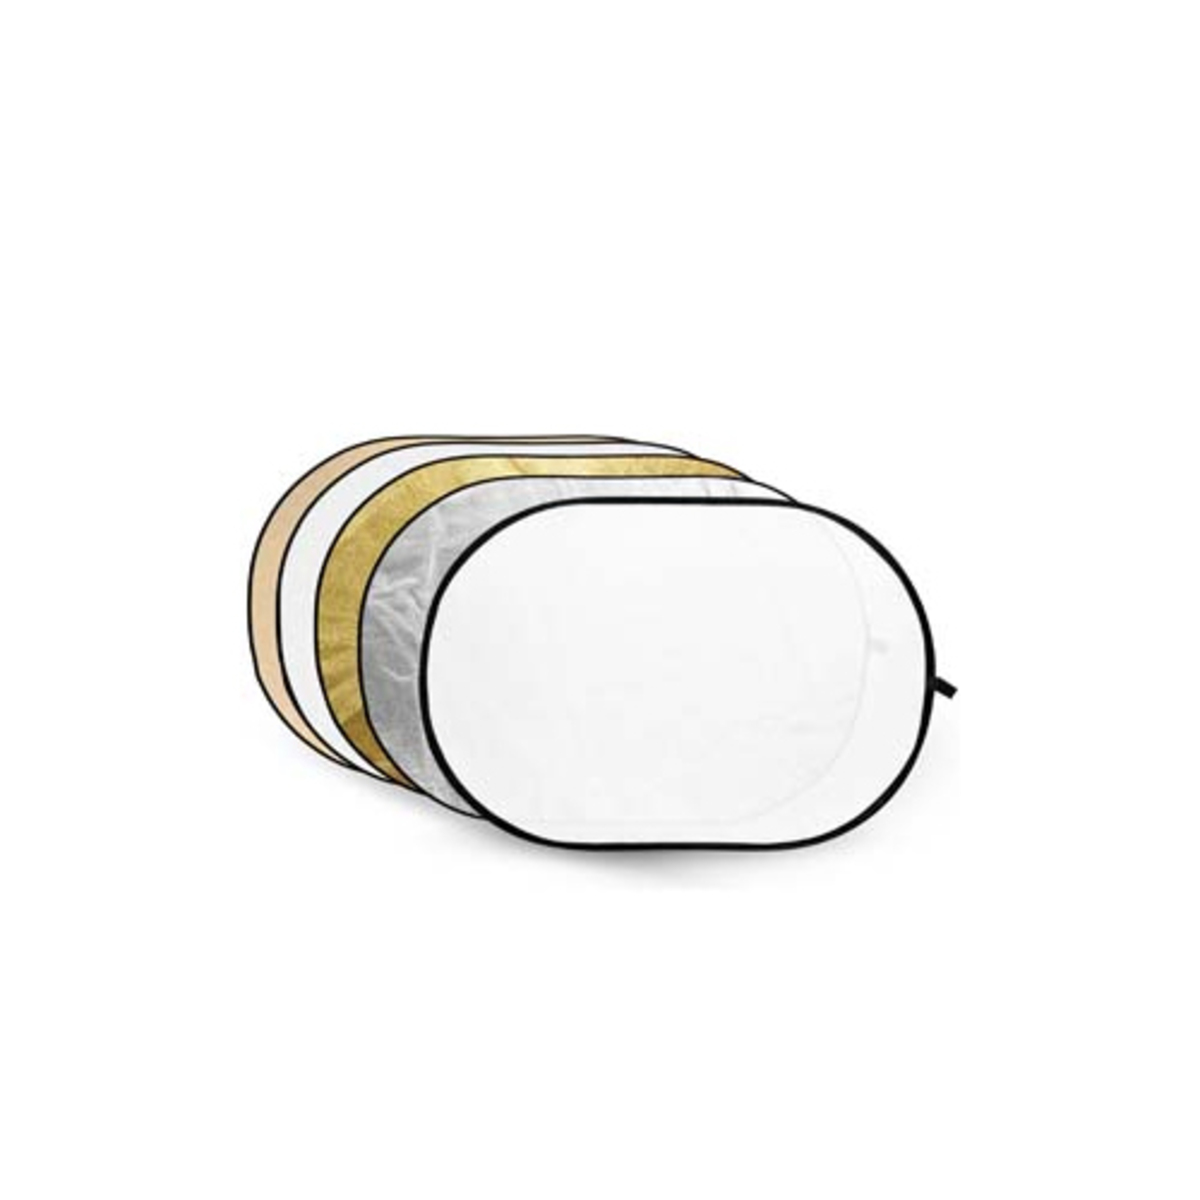 Godox 5-in-1 Gold, Silver, Soft Gold, White, Transparant Reflector disc - 80 x 120cm